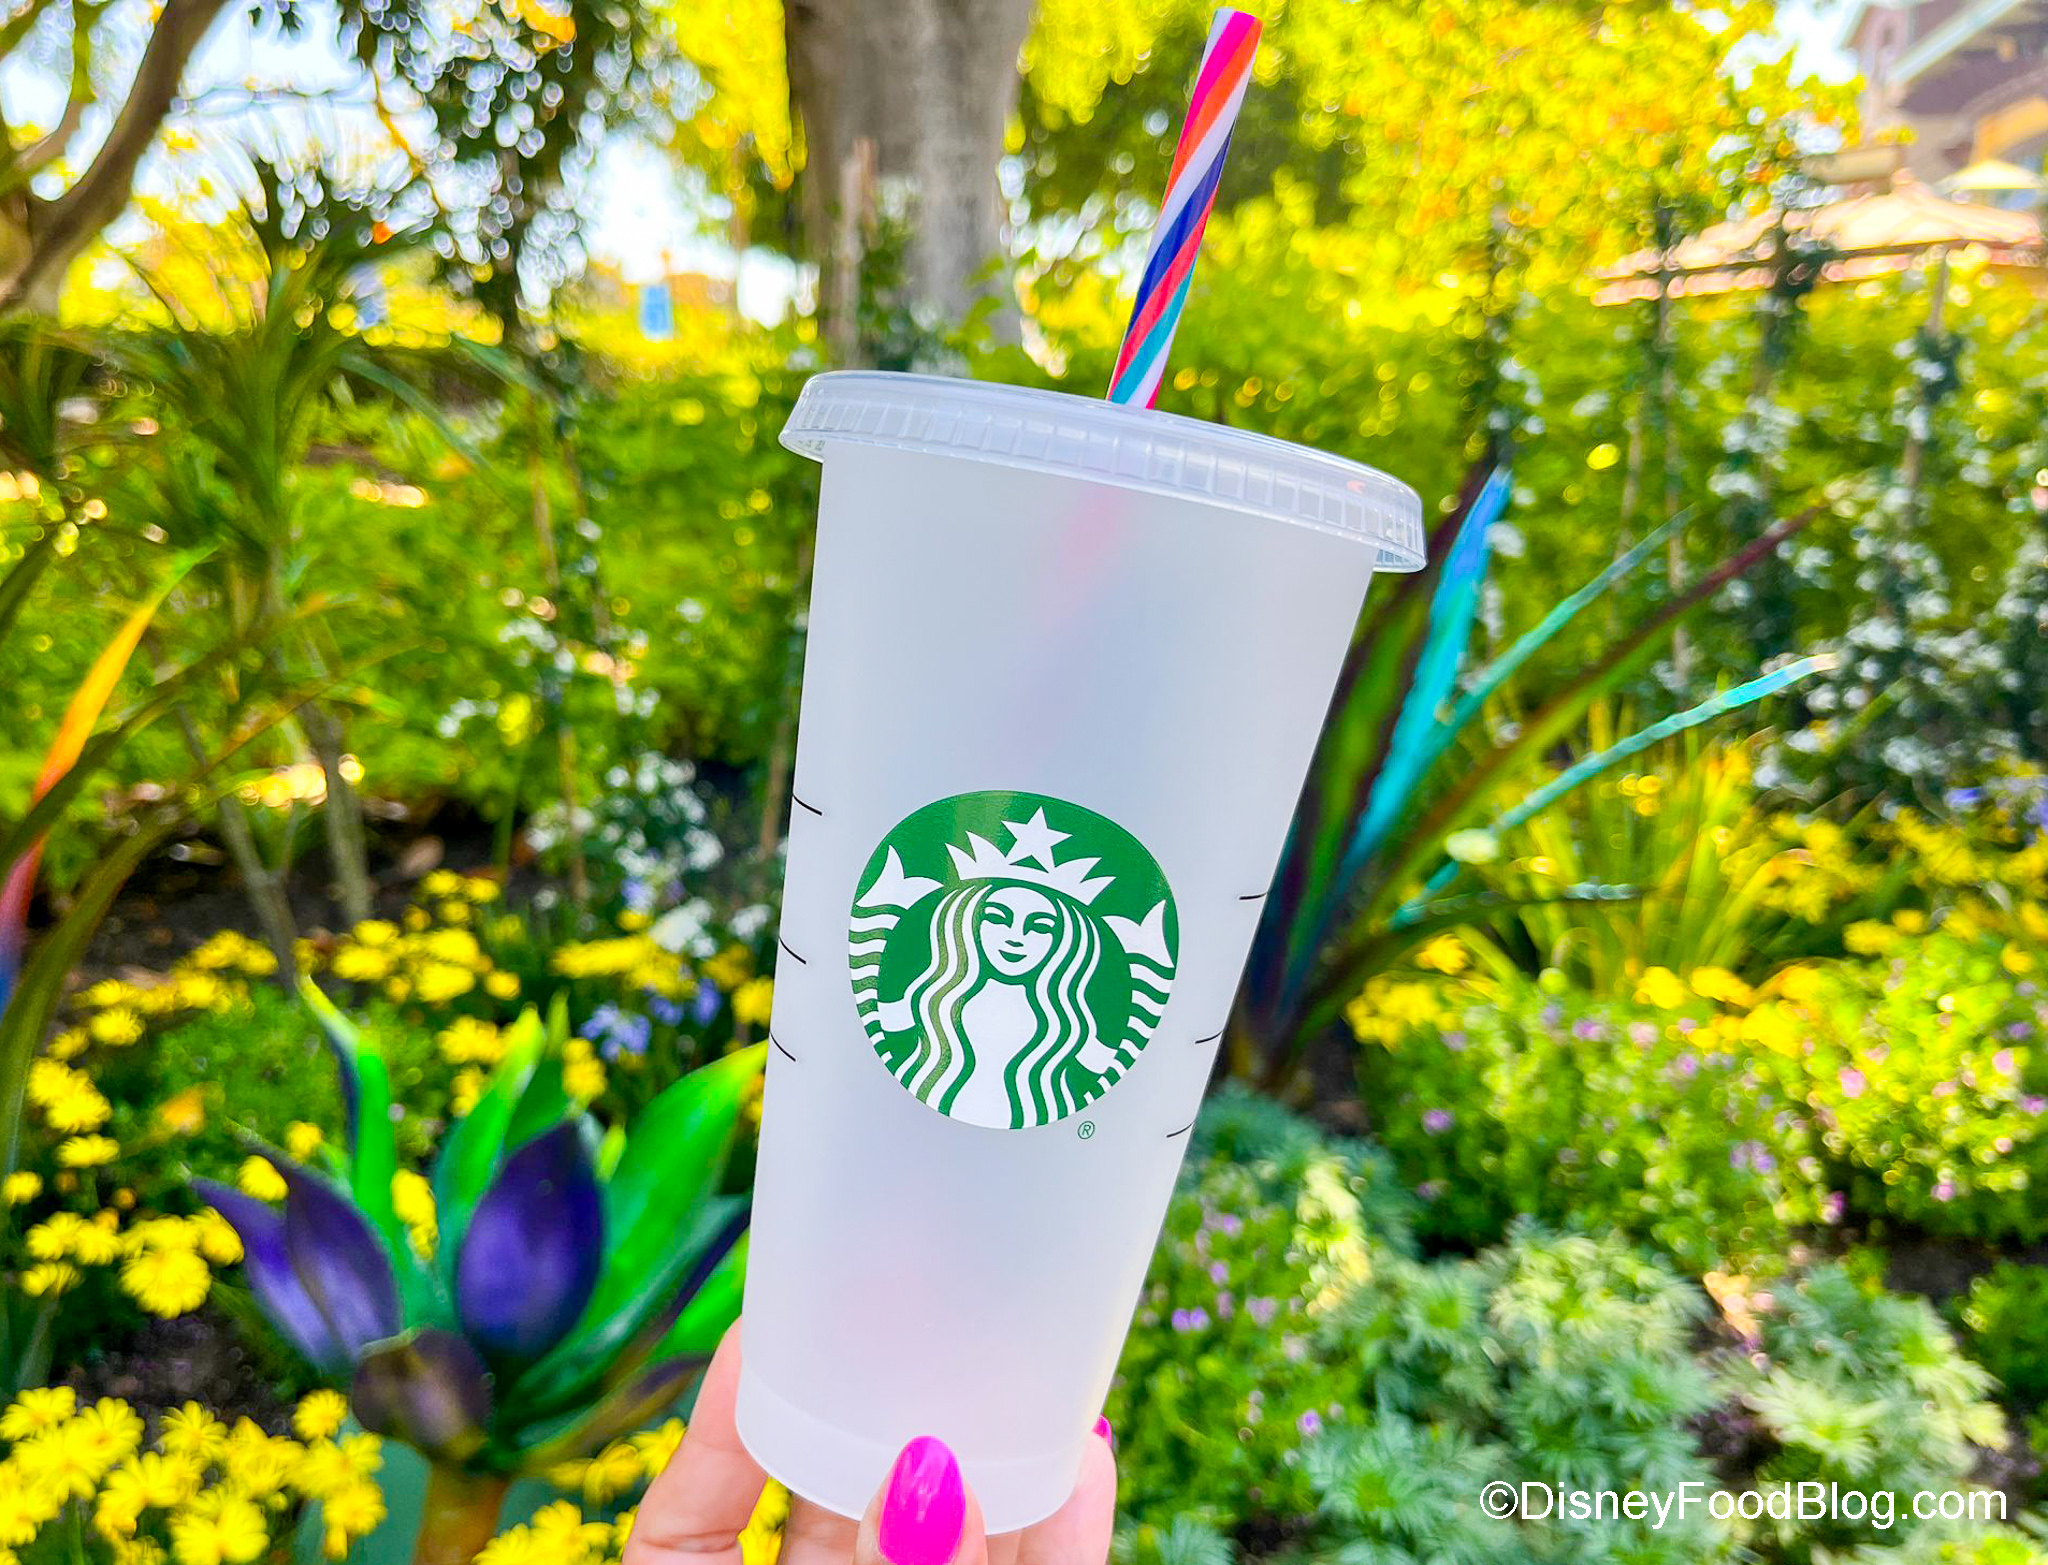 Starbucks Has New Color-Changing Cups for All the Iced Coffee Drinkers